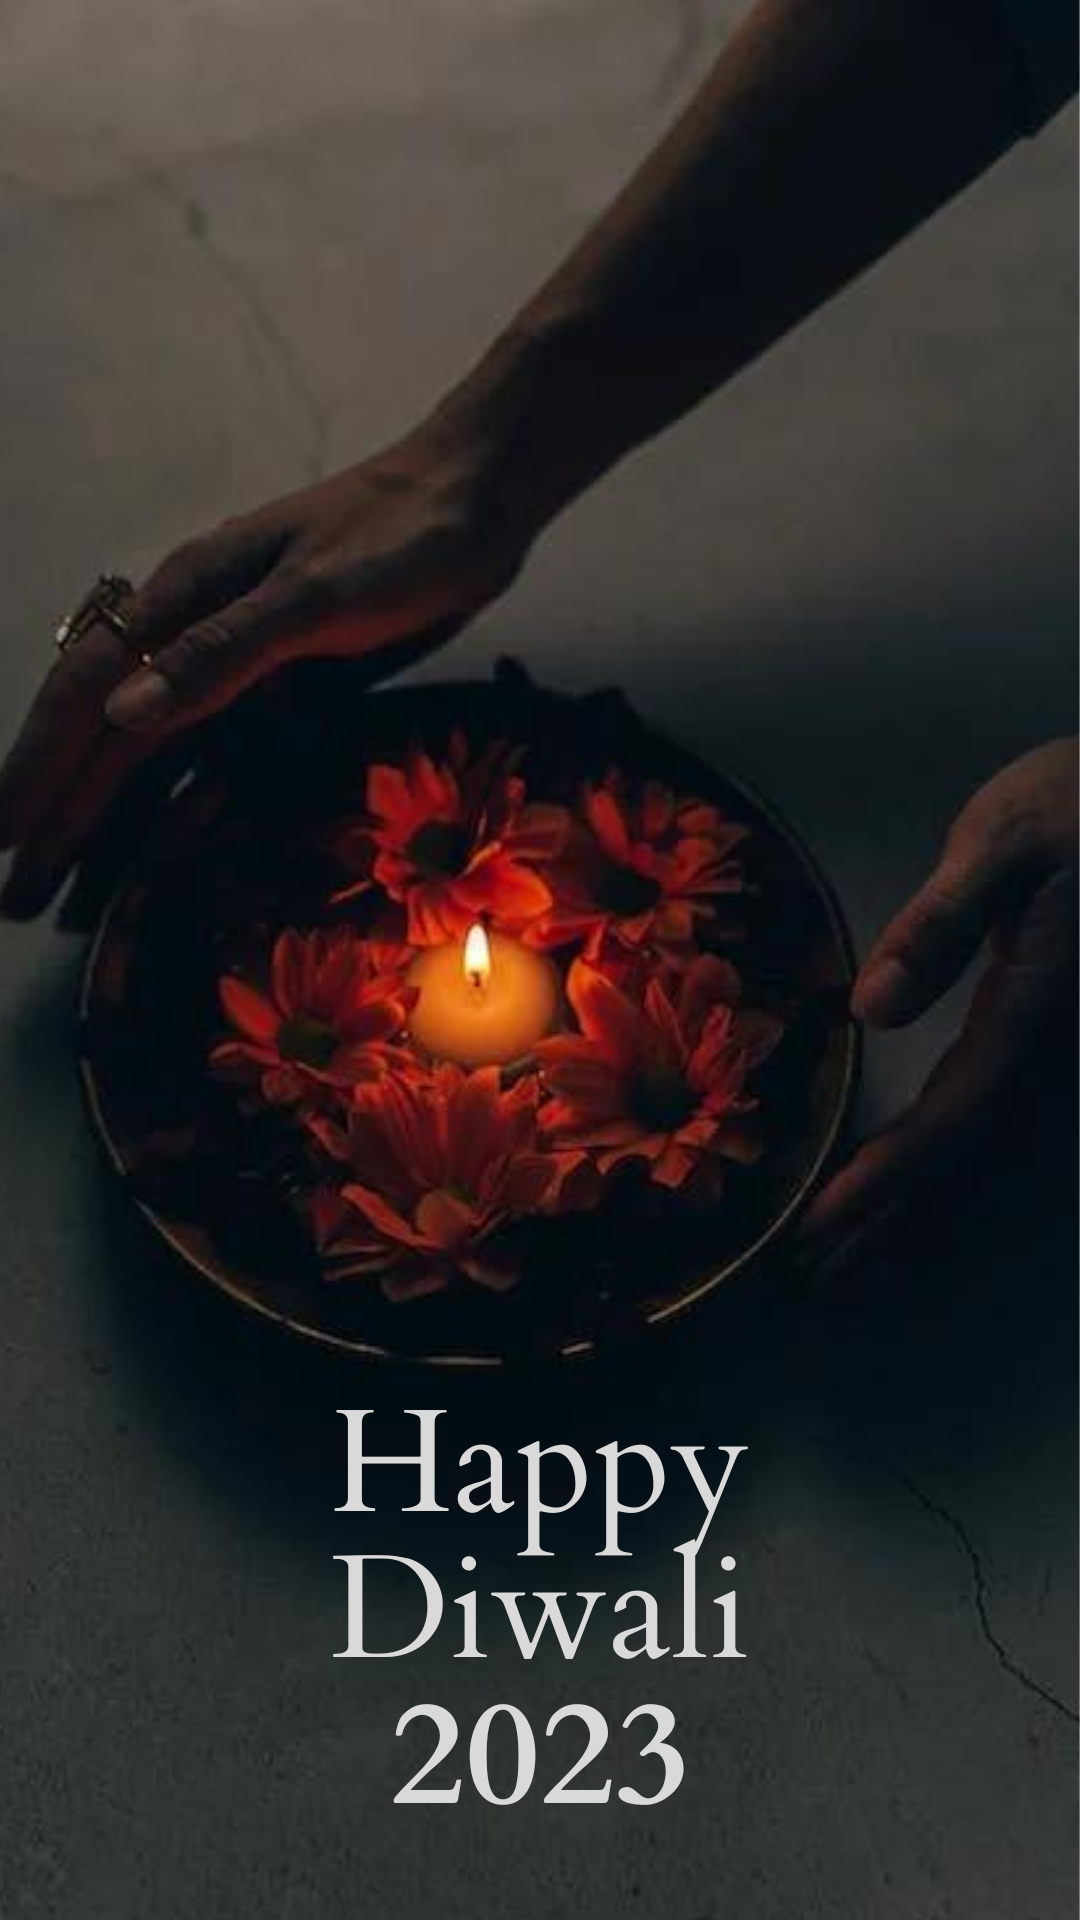 #{"id":221,"_id":"61f3f785e0f744570541c10c","name":"happy-diwali-status","count":9,"data":"{\"_id\":{\"$oid\":\"61f3f785e0f744570541c10c\"},\"id\":\"195\",\"name\":\"happy-diwali-status\",\"created_at\":\"2020-11-07-17:56:11\",\"updated_at\":\"2020-11-07-17:56:11\",\"updatedAt\":{\"$date\":\"2022-01-28T14:33:44.889Z\"},\"count\":9}","deleted_at":null,"created_at":"2020-11-07T05:56:11.000000Z","updated_at":"2020-11-07T05:56:11.000000Z","merge_with":null,"pivot":{"taggable_id":2387,"tag_id":221,"taggable_type":"App\\Models\\Status"}}, #{"id":222,"_id":"61f3f785e0f744570541c10d","name":"diwali-wishes","count":35,"data":"{\"_id\":{\"$oid\":\"61f3f785e0f744570541c10d\"},\"id\":\"196\",\"name\":\"diwali-wishes\",\"created_at\":\"2020-11-07-17:56:11\",\"updated_at\":\"2020-11-07-17:56:11\",\"updatedAt\":{\"$date\":\"2022-01-28T14:33:44.889Z\"},\"count\":35}","deleted_at":null,"created_at":"2020-11-07T05:56:11.000000Z","updated_at":"2020-11-07T05:56:11.000000Z","merge_with":null,"pivot":{"taggable_id":2387,"tag_id":222,"taggable_type":"App\\Models\\Status"}}, #{"id":2578,"_id":null,"name":"happy-diwali-quotes","count":0,"data":null,"deleted_at":null,"created_at":"2023-09-17T05:39:53.000000Z","updated_at":"2023-09-17T05:39:53.000000Z","merge_with":null,"pivot":{"taggable_id":2387,"tag_id":2578,"taggable_type":"App\\Models\\Status"}}, #{"id":690,"_id":"61f3f785e0f744570541c4d5","name":"happy-diwali","count":14,"data":"{\"_id\":{\"$oid\":\"61f3f785e0f744570541c4d5\"},\"id\":\"1164\",\"name\":\"happy-diwali\",\"created_at\":\"2021-10-27-13:51:23\",\"updated_at\":\"2021-10-27-13:51:23\",\"updatedAt\":{\"$date\":\"2022-01-28T14:33:44.945Z\"},\"count\":14}","deleted_at":null,"created_at":"2021-10-27T01:51:23.000000Z","updated_at":"2021-10-27T01:51:23.000000Z","merge_with":null,"pivot":{"taggable_id":2387,"tag_id":690,"taggable_type":"App\\Models\\Status"}}, #{"id":2579,"_id":null,"name":"happy-diwali-pictures","count":0,"data":null,"deleted_at":null,"created_at":"2023-09-17T05:39:53.000000Z","updated_at":"2023-09-17T05:39:53.000000Z","merge_with":null,"pivot":{"taggable_id":2387,"tag_id":2579,"taggable_type":"App\\Models\\Status"}}, #{"id":2580,"_id":null,"name":"happy-diwali-2023","count":0,"data":null,"deleted_at":null,"created_at":"2023-09-17T05:39:53.000000Z","updated_at":"2023-09-17T05:39:53.000000Z","merge_with":null,"pivot":{"taggable_id":2387,"tag_id":2580,"taggable_type":"App\\Models\\Status"}}, #{"id":698,"_id":"61f3f785e0f744570541c4dd","name":"shubh-diwali","count":3,"data":"{\"_id\":{\"$oid\":\"61f3f785e0f744570541c4dd\"},\"id\":\"1172\",\"name\":\"shubh-diwali\",\"created_at\":\"2021-10-27-14:03:34\",\"updated_at\":\"2021-10-27-14:03:34\",\"updatedAt\":{\"$date\":\"2022-01-28T14:33:44.944Z\"},\"count\":3}","deleted_at":null,"created_at":"2021-10-27T02:03:34.000000Z","updated_at":"2021-10-27T02:03:34.000000Z","merge_with":null,"pivot":{"taggable_id":2387,"tag_id":698,"taggable_type":"App\\Models\\Status"}}